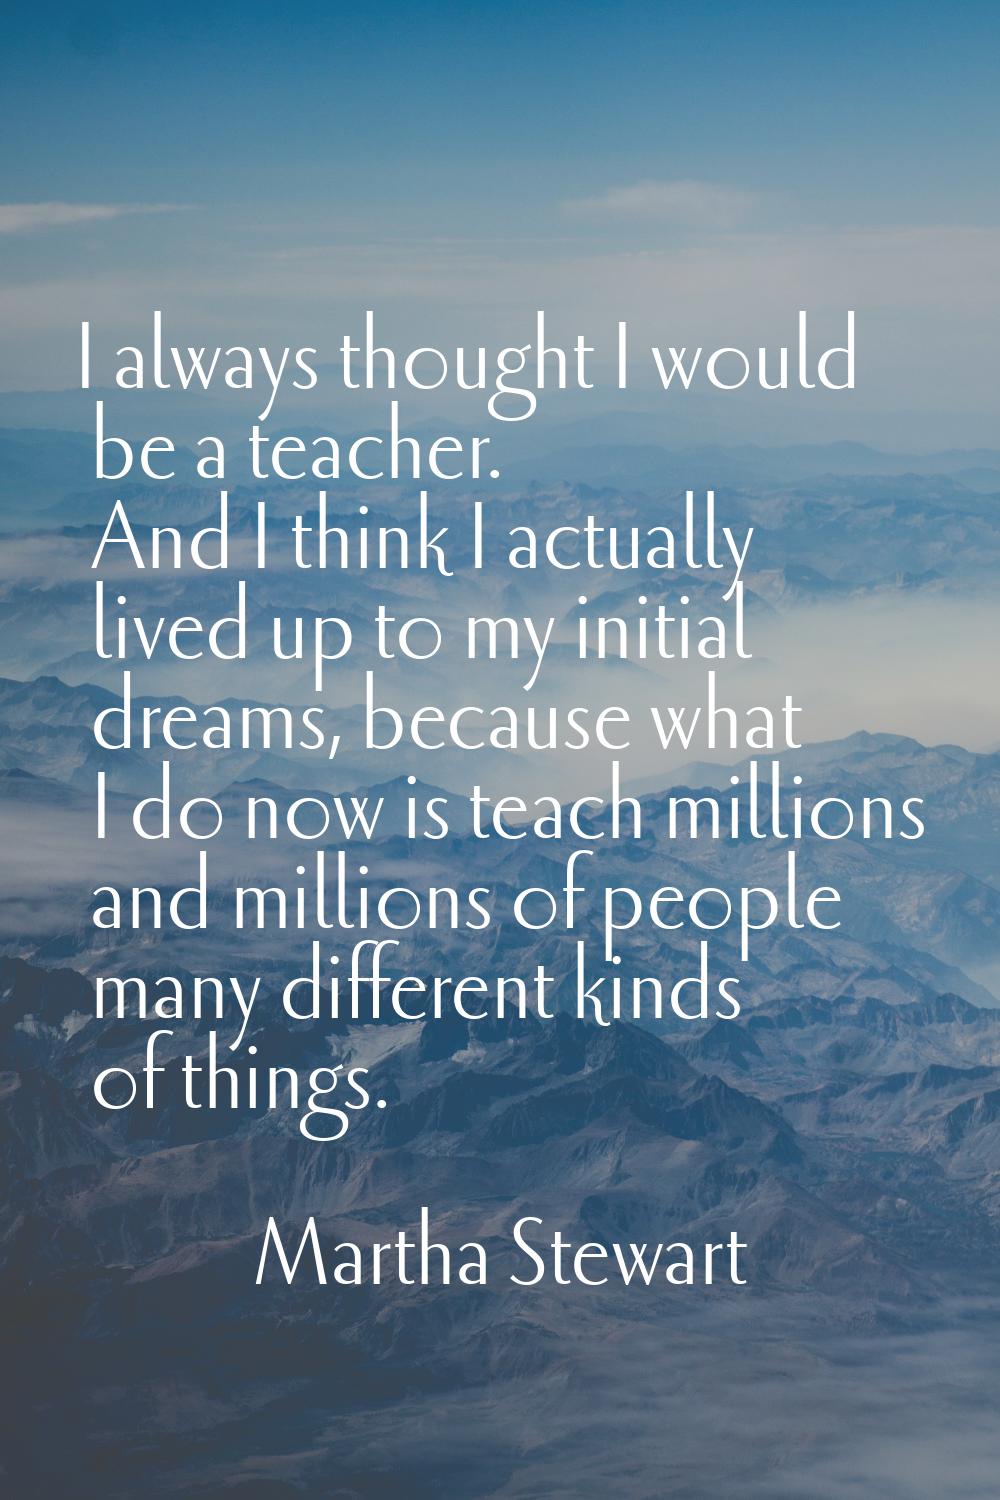 I always thought I would be a teacher. And I think I actually lived up to my initial dreams, becaus